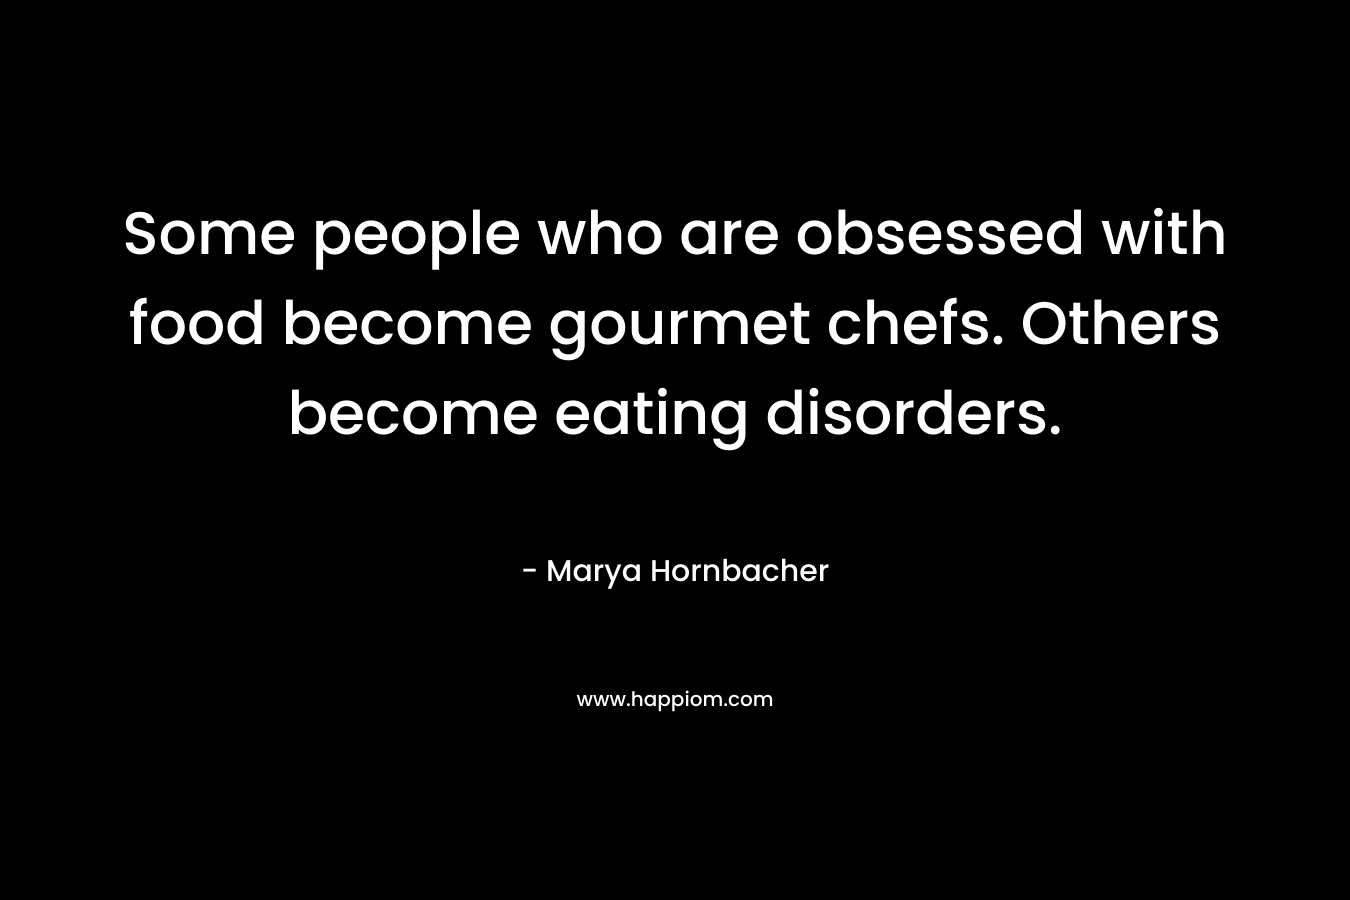 Some people who are obsessed with food become gourmet chefs. Others become eating disorders. – Marya Hornbacher